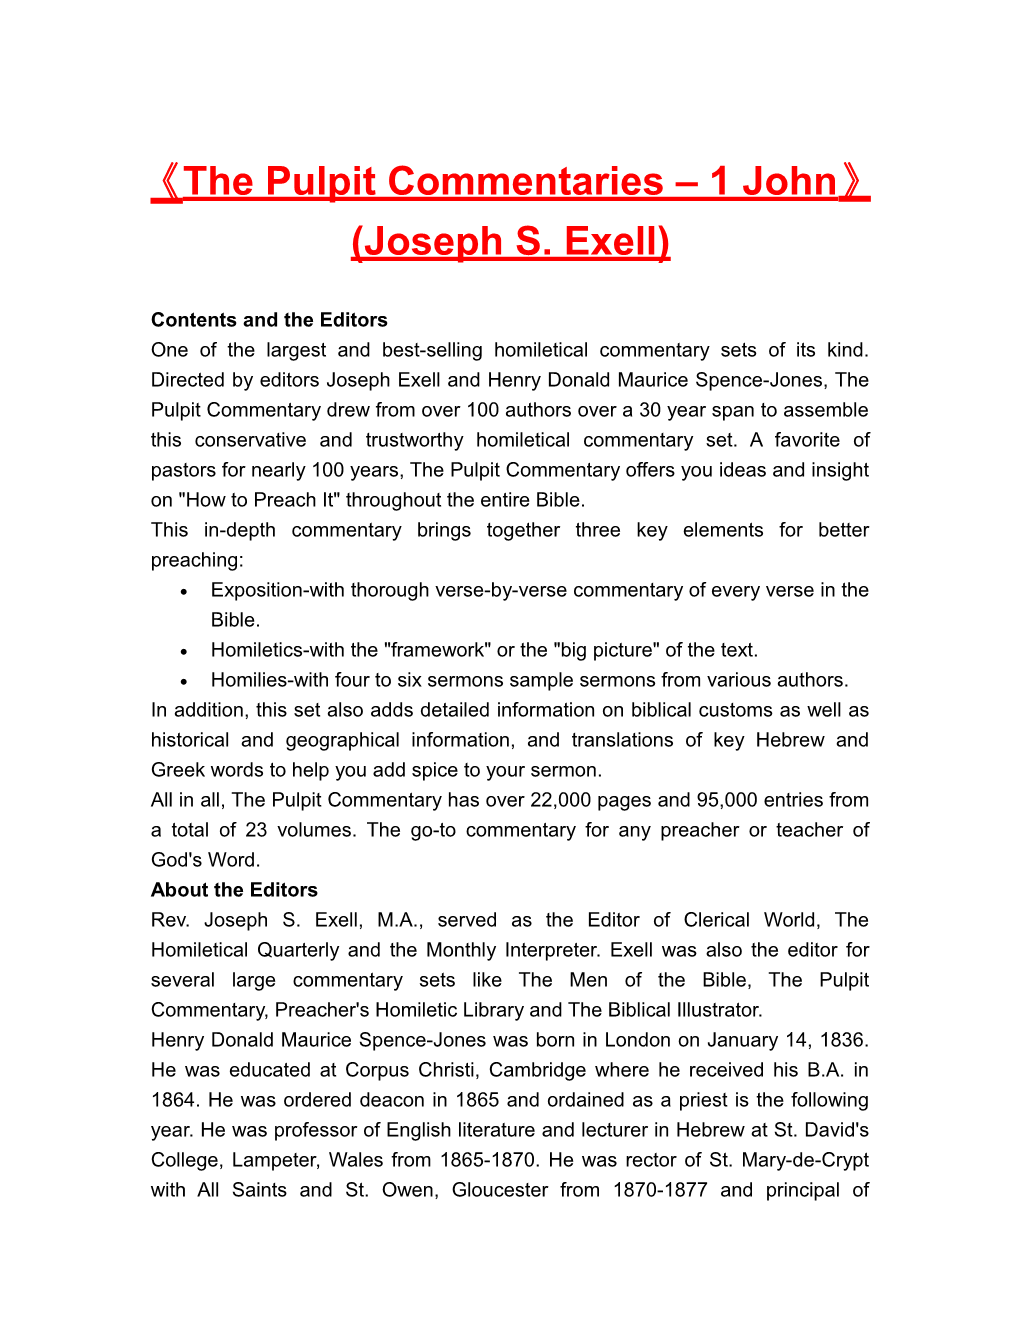 The Pulpit Commentaries 1 John (Joseph S. Exell)